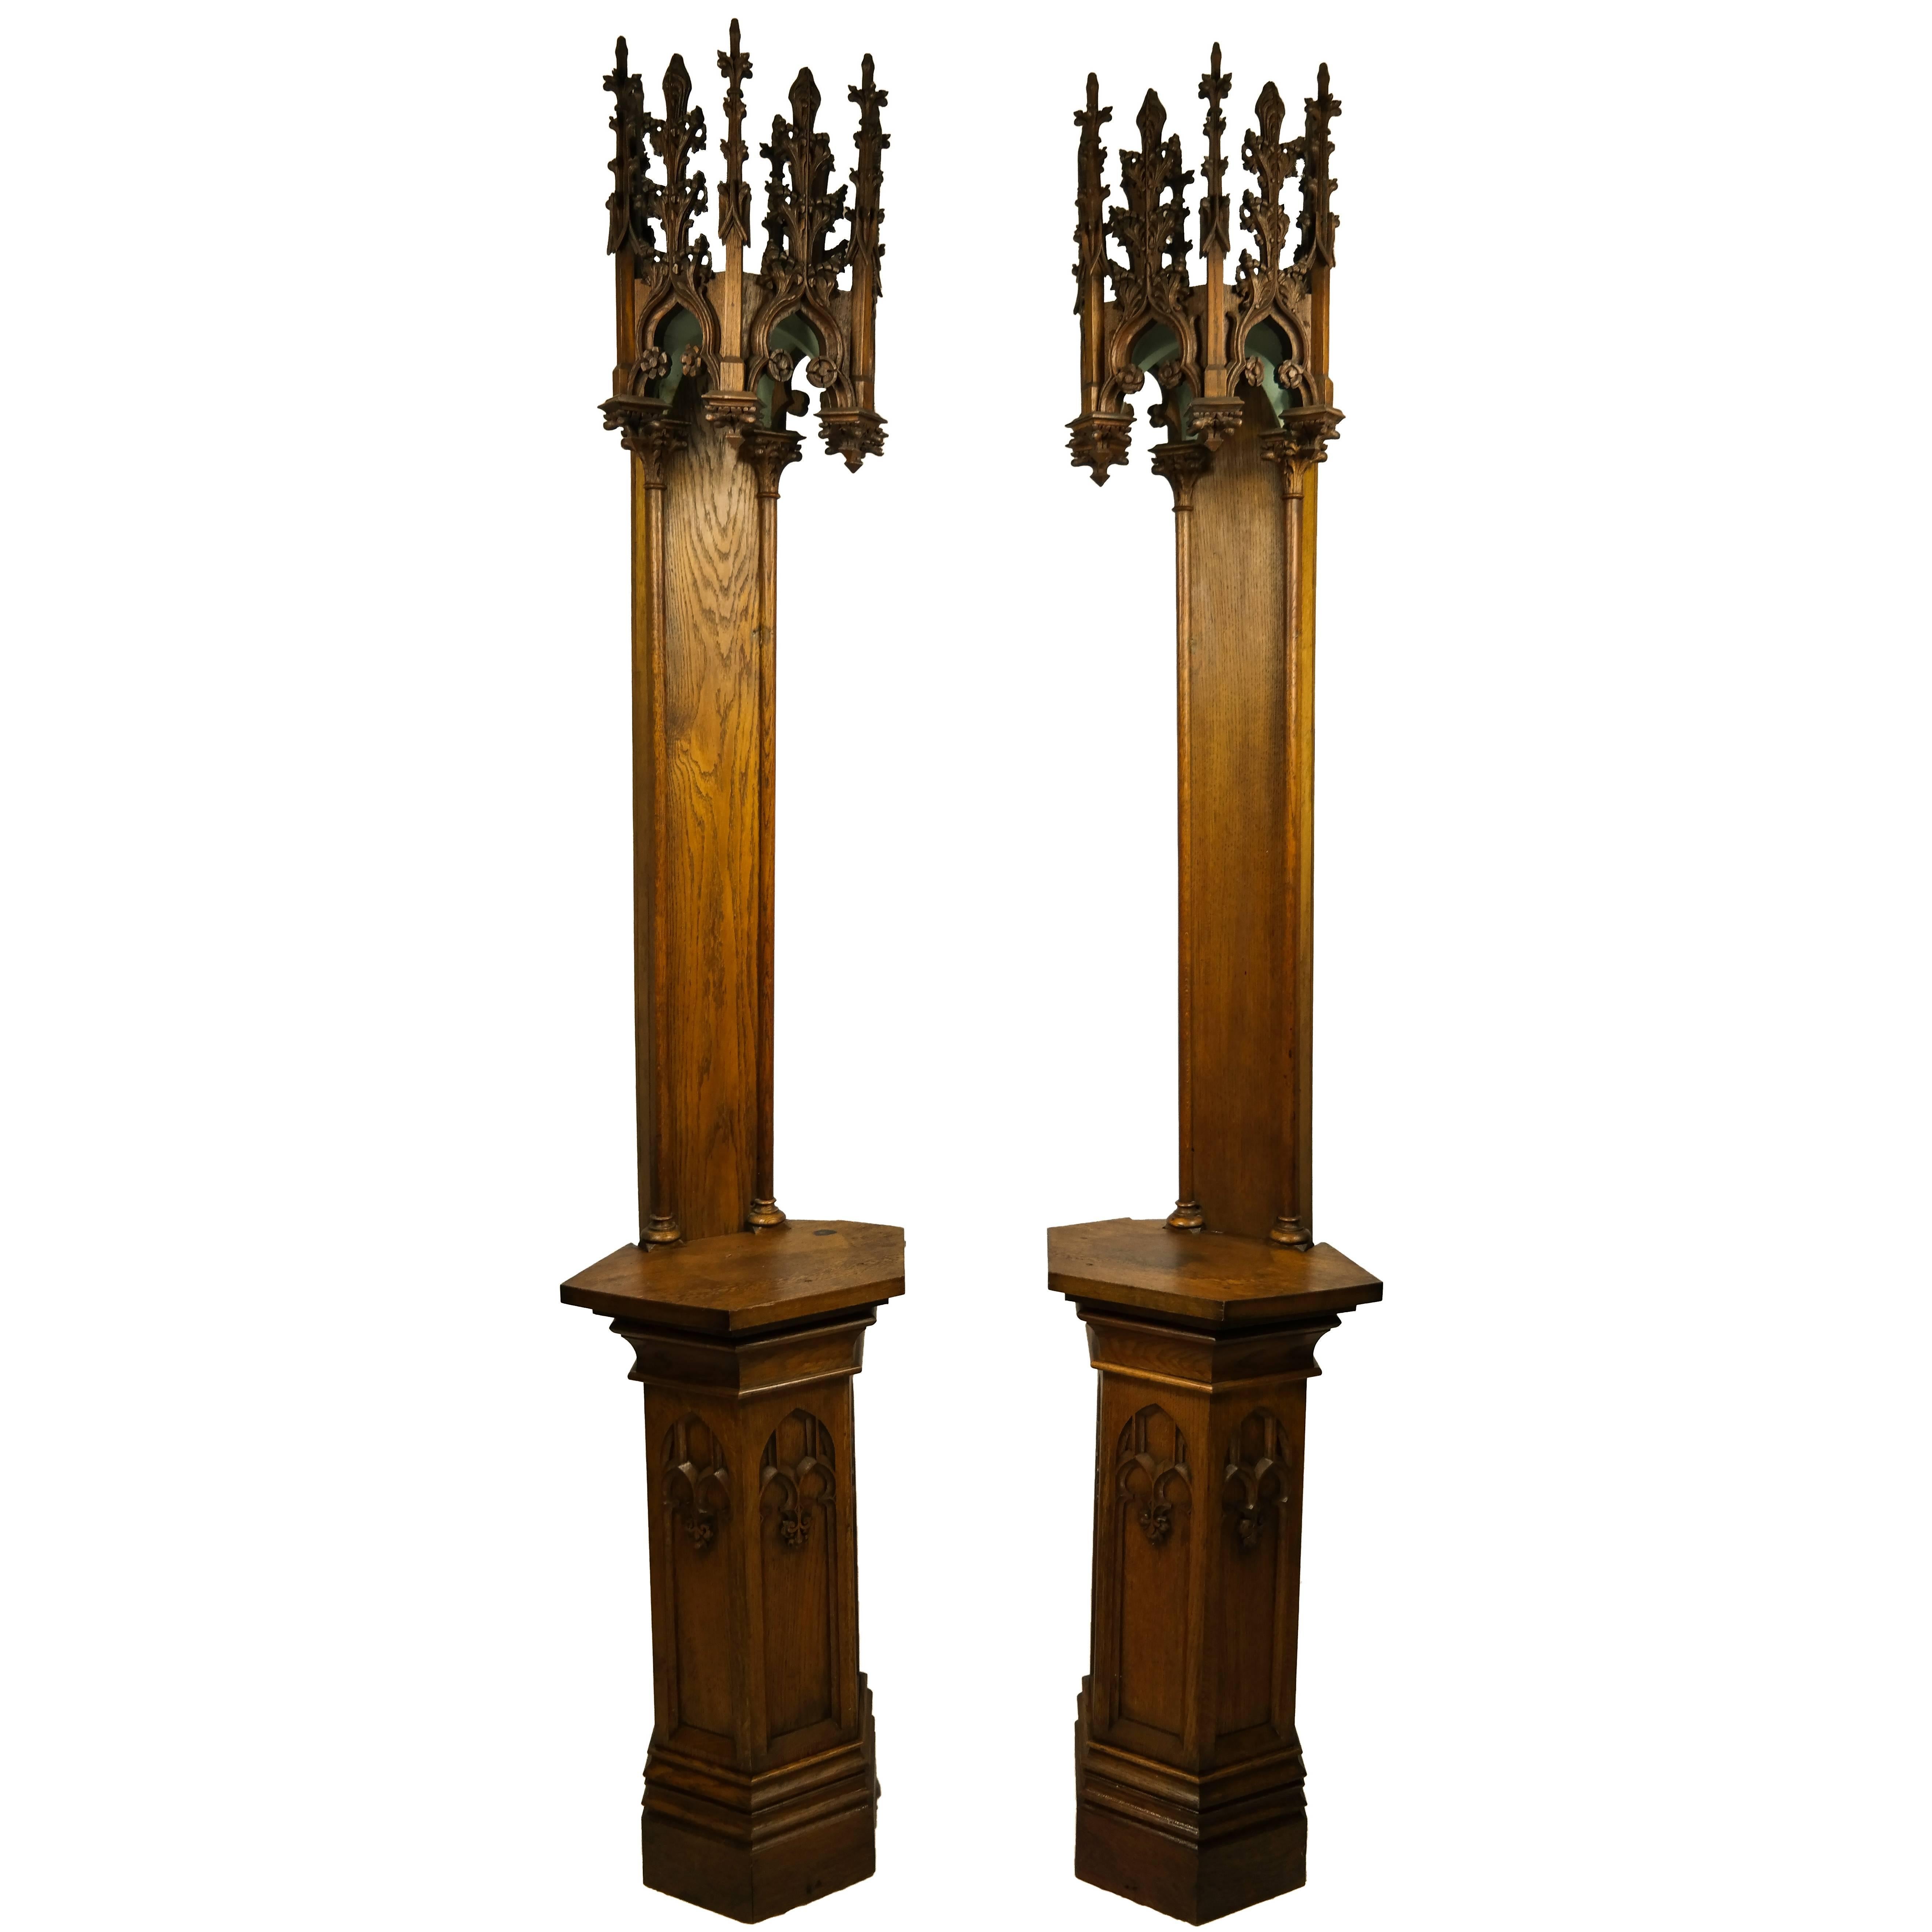 Pair of French Statue Niches, circa 1875